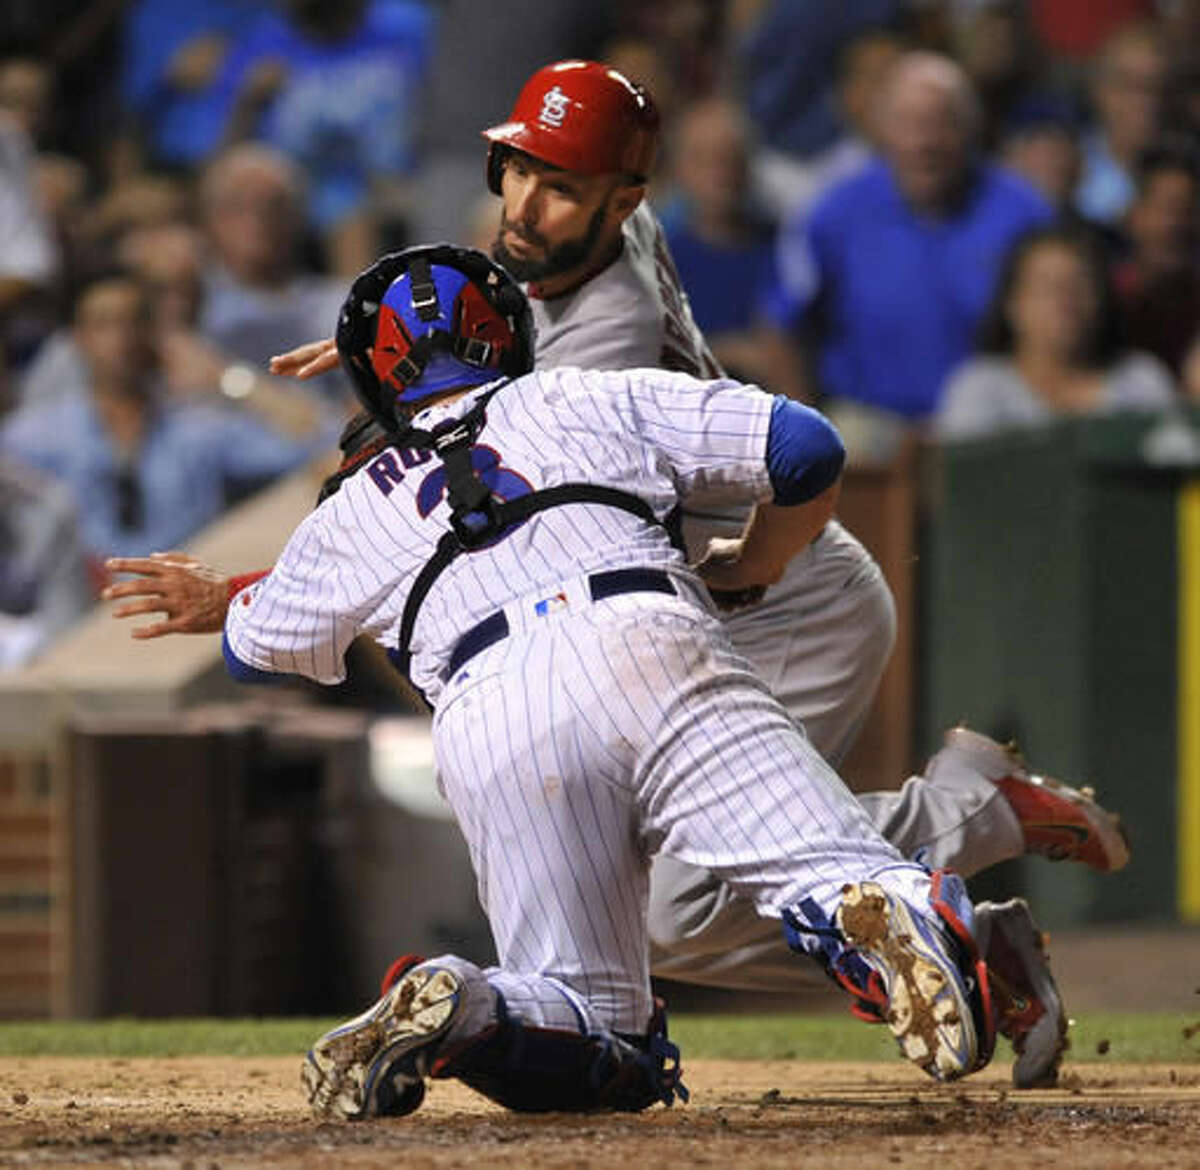 Chicago Cubs catcher David Ross tags out St. Louis Cardinals' Matt Carpenter at home plate during the seventh inning of a baseball game Thursday, Aug. 11, 2016, in Chicago. (AP Photo/Paul Beaty)